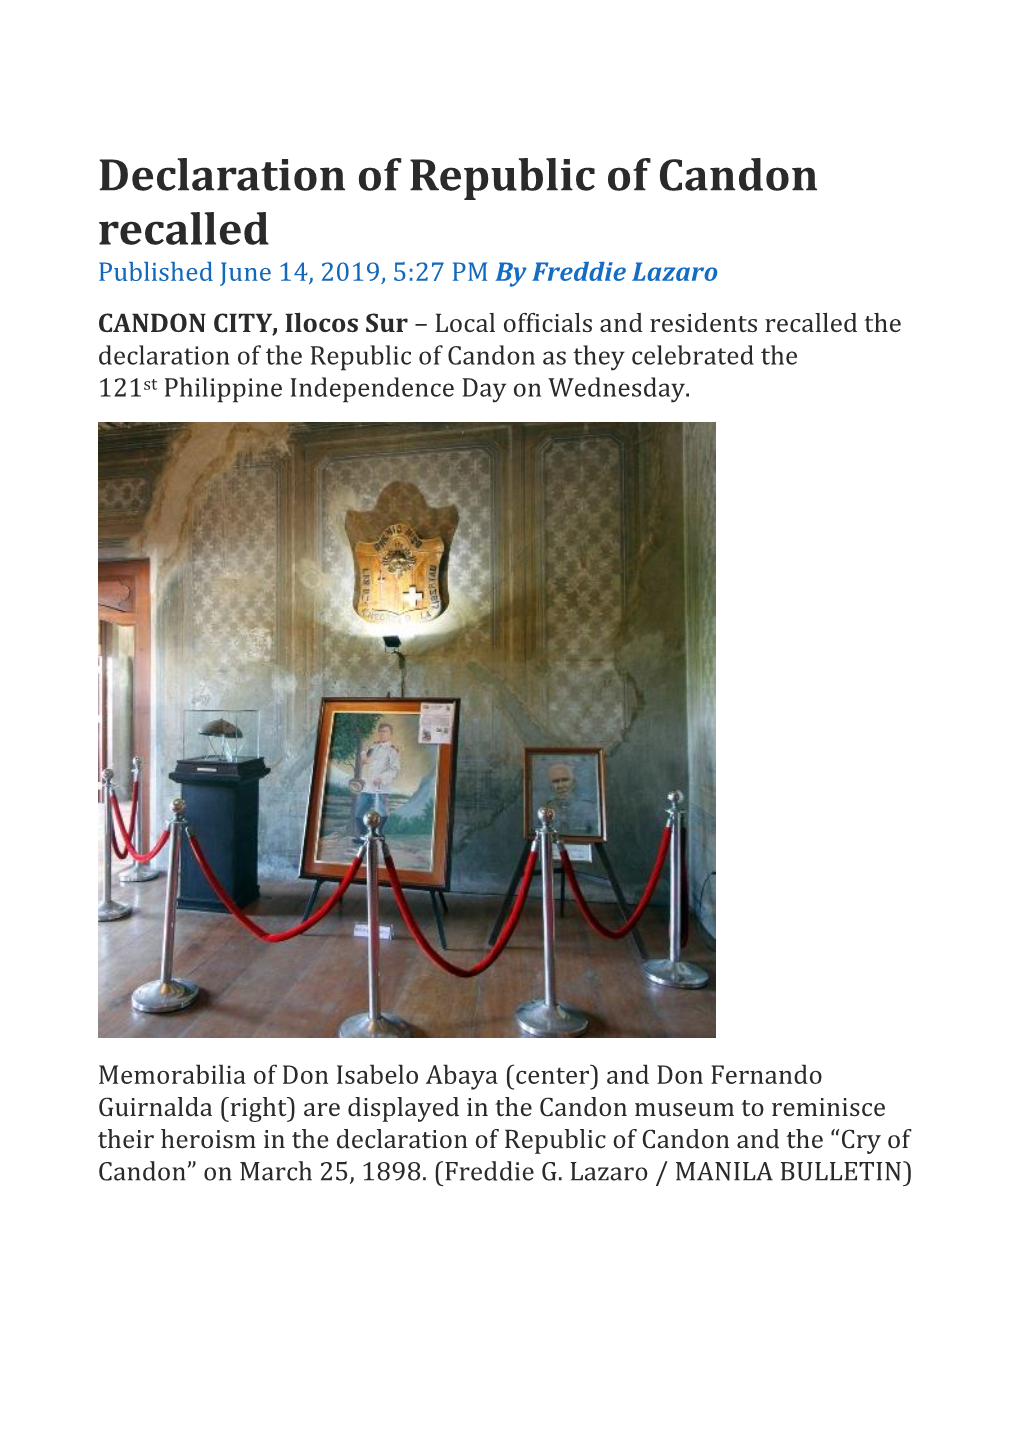 Declaration of Republic of Candon Recalled